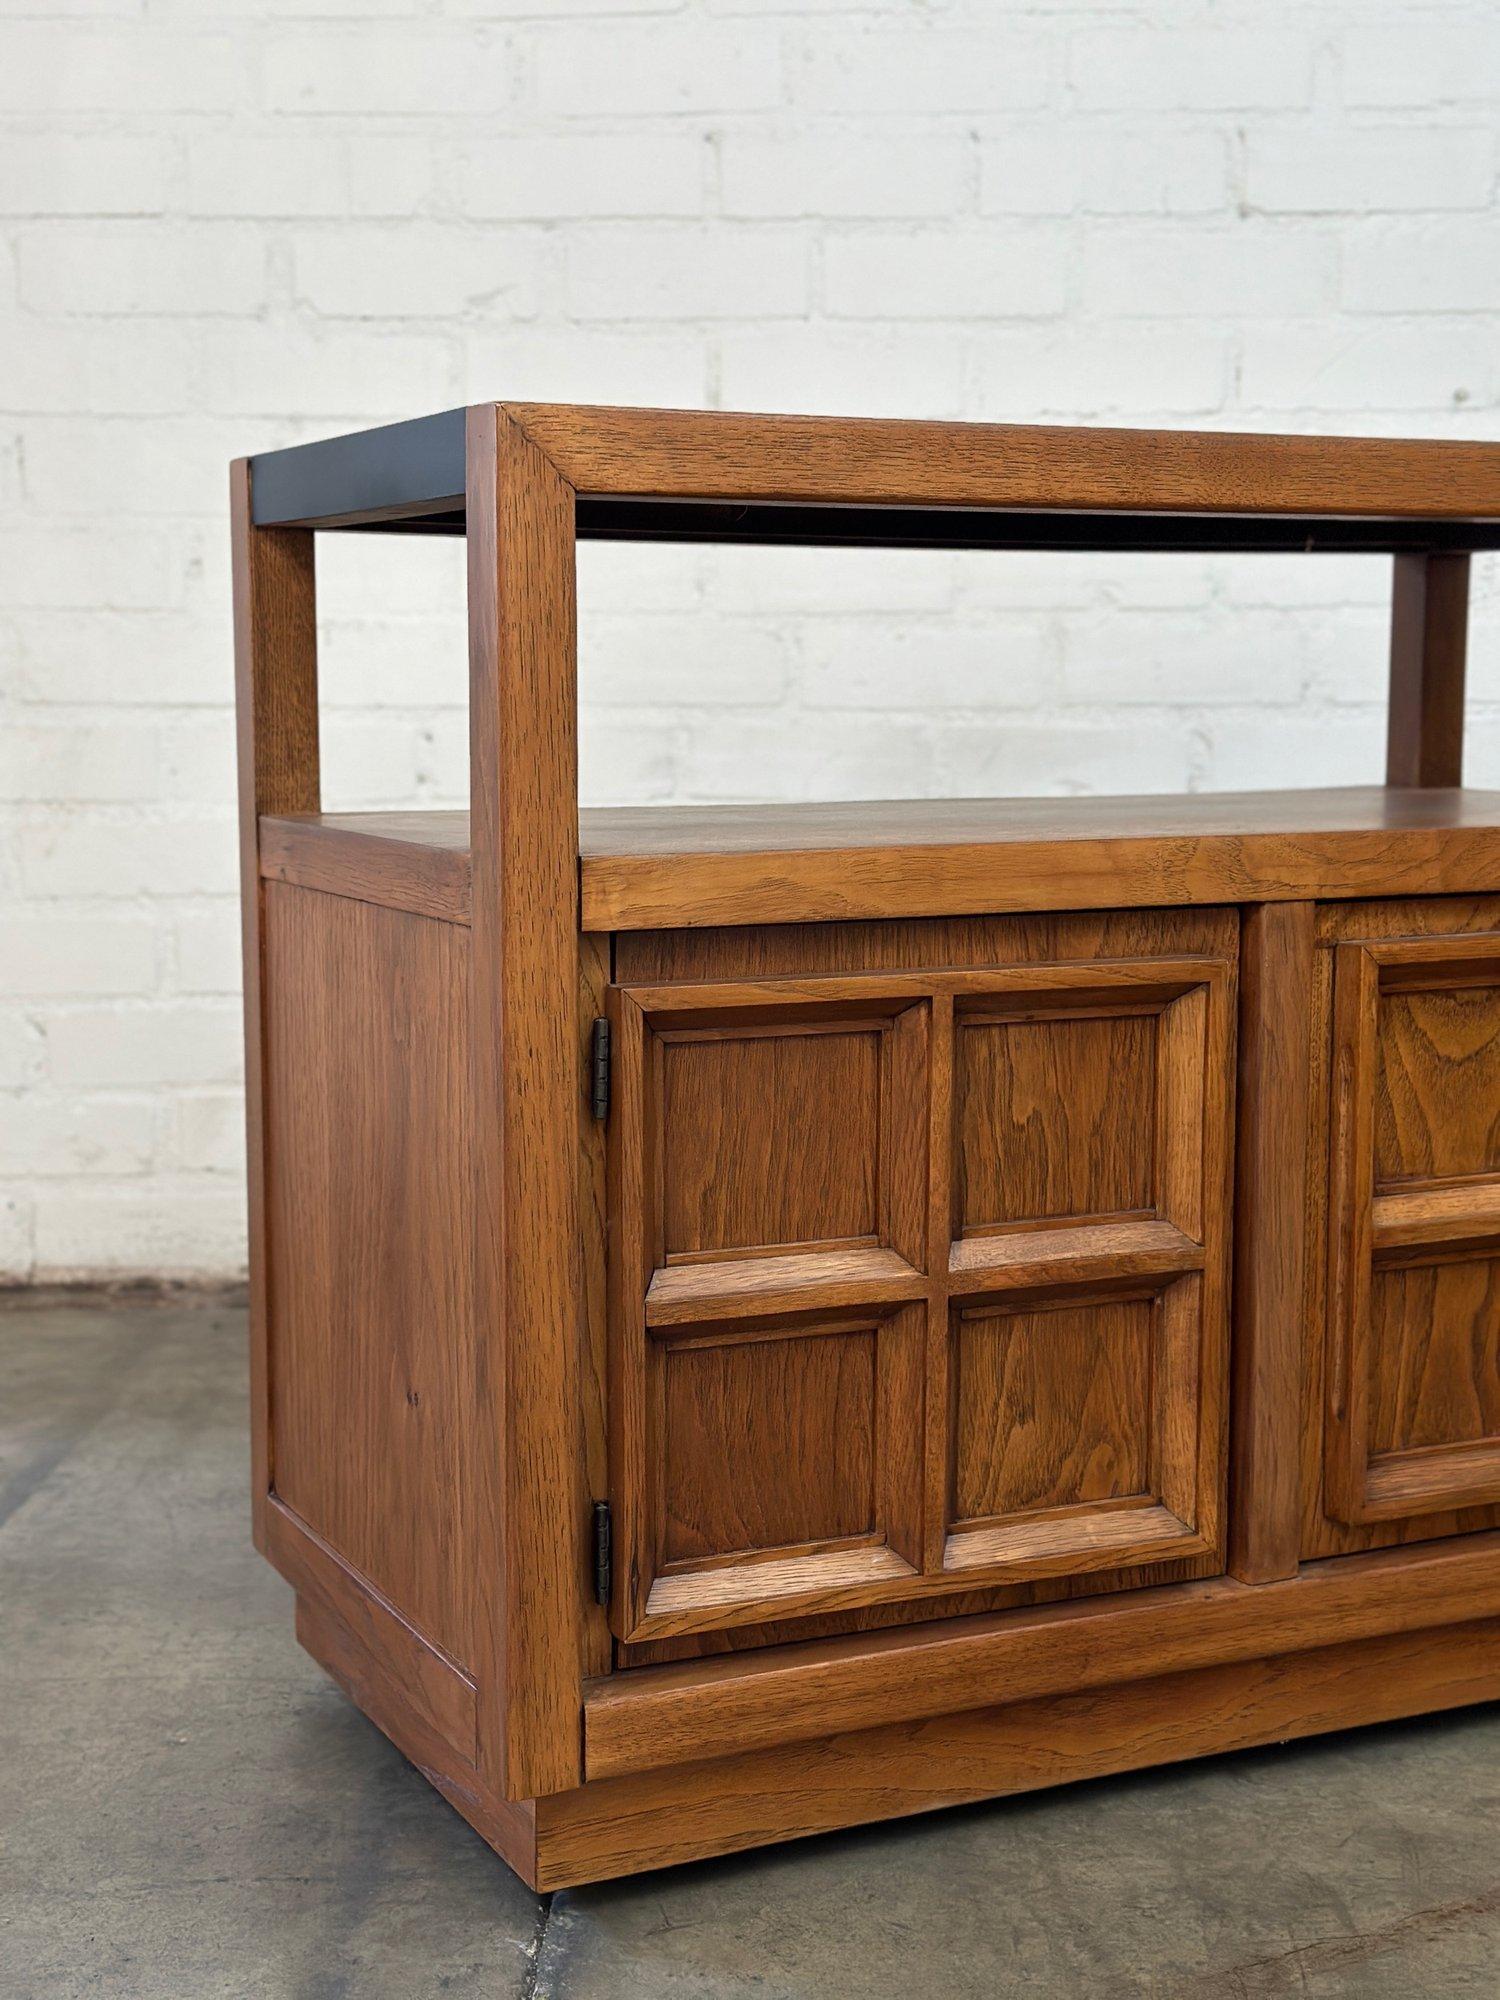 W38 D18.5 H31.25

Fully restored solid oak and laminate bar by American of Martinsville. Item features nice border fronts on drawers and hidden handles on the inner edge of the doors. Item is finished on all sides and sits on casters. 